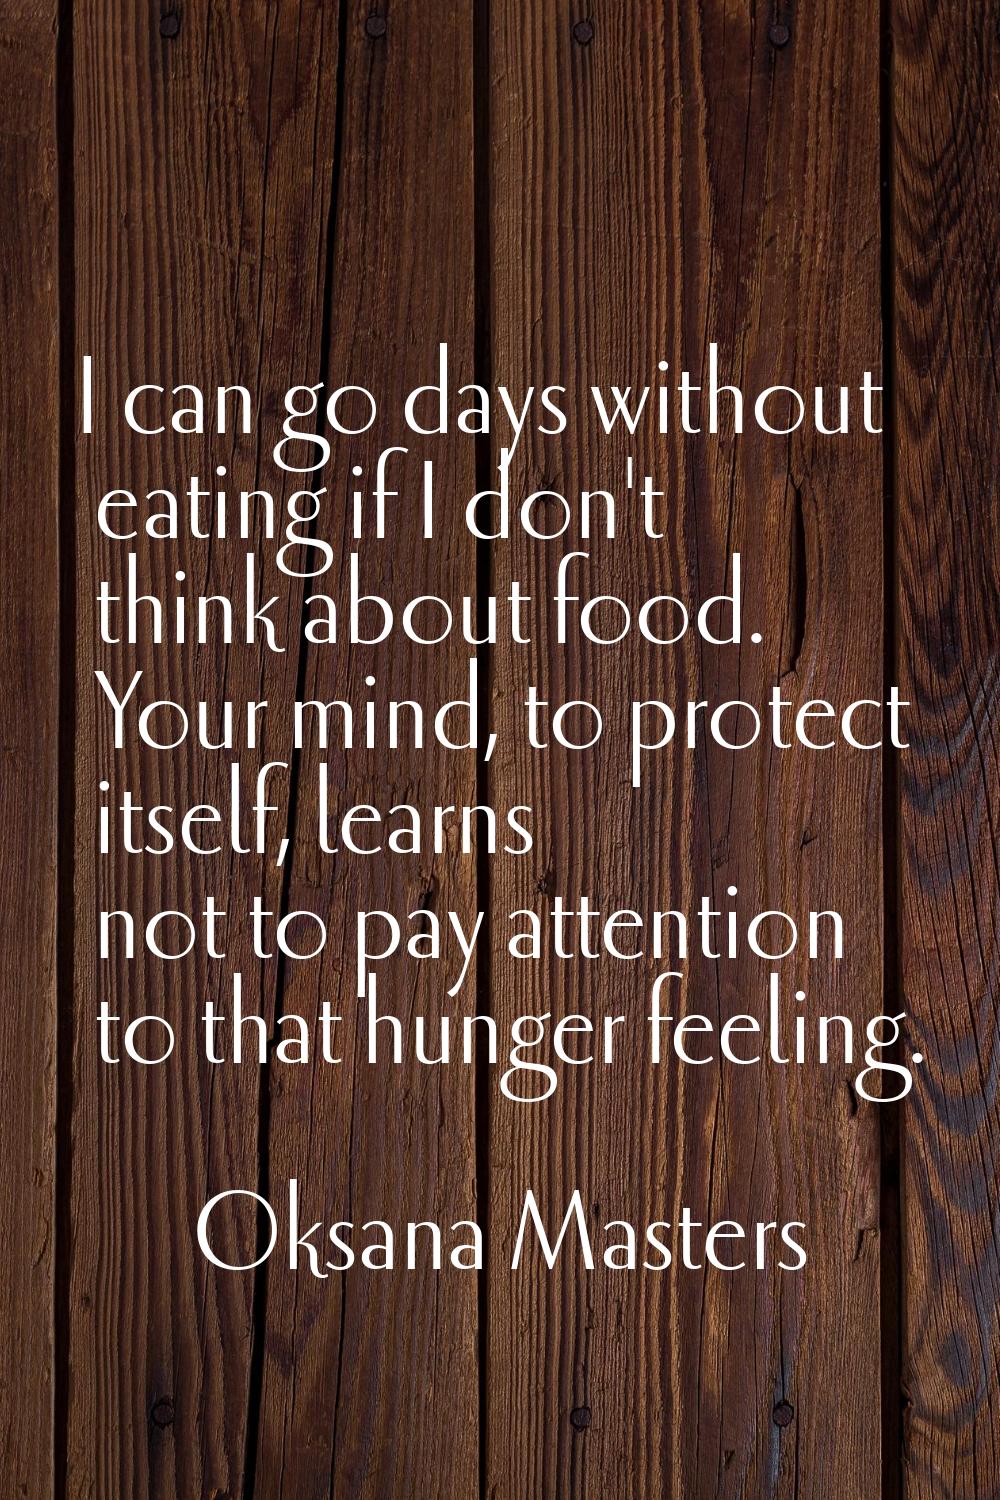 I can go days without eating if I don't think about food. Your mind, to protect itself, learns not 